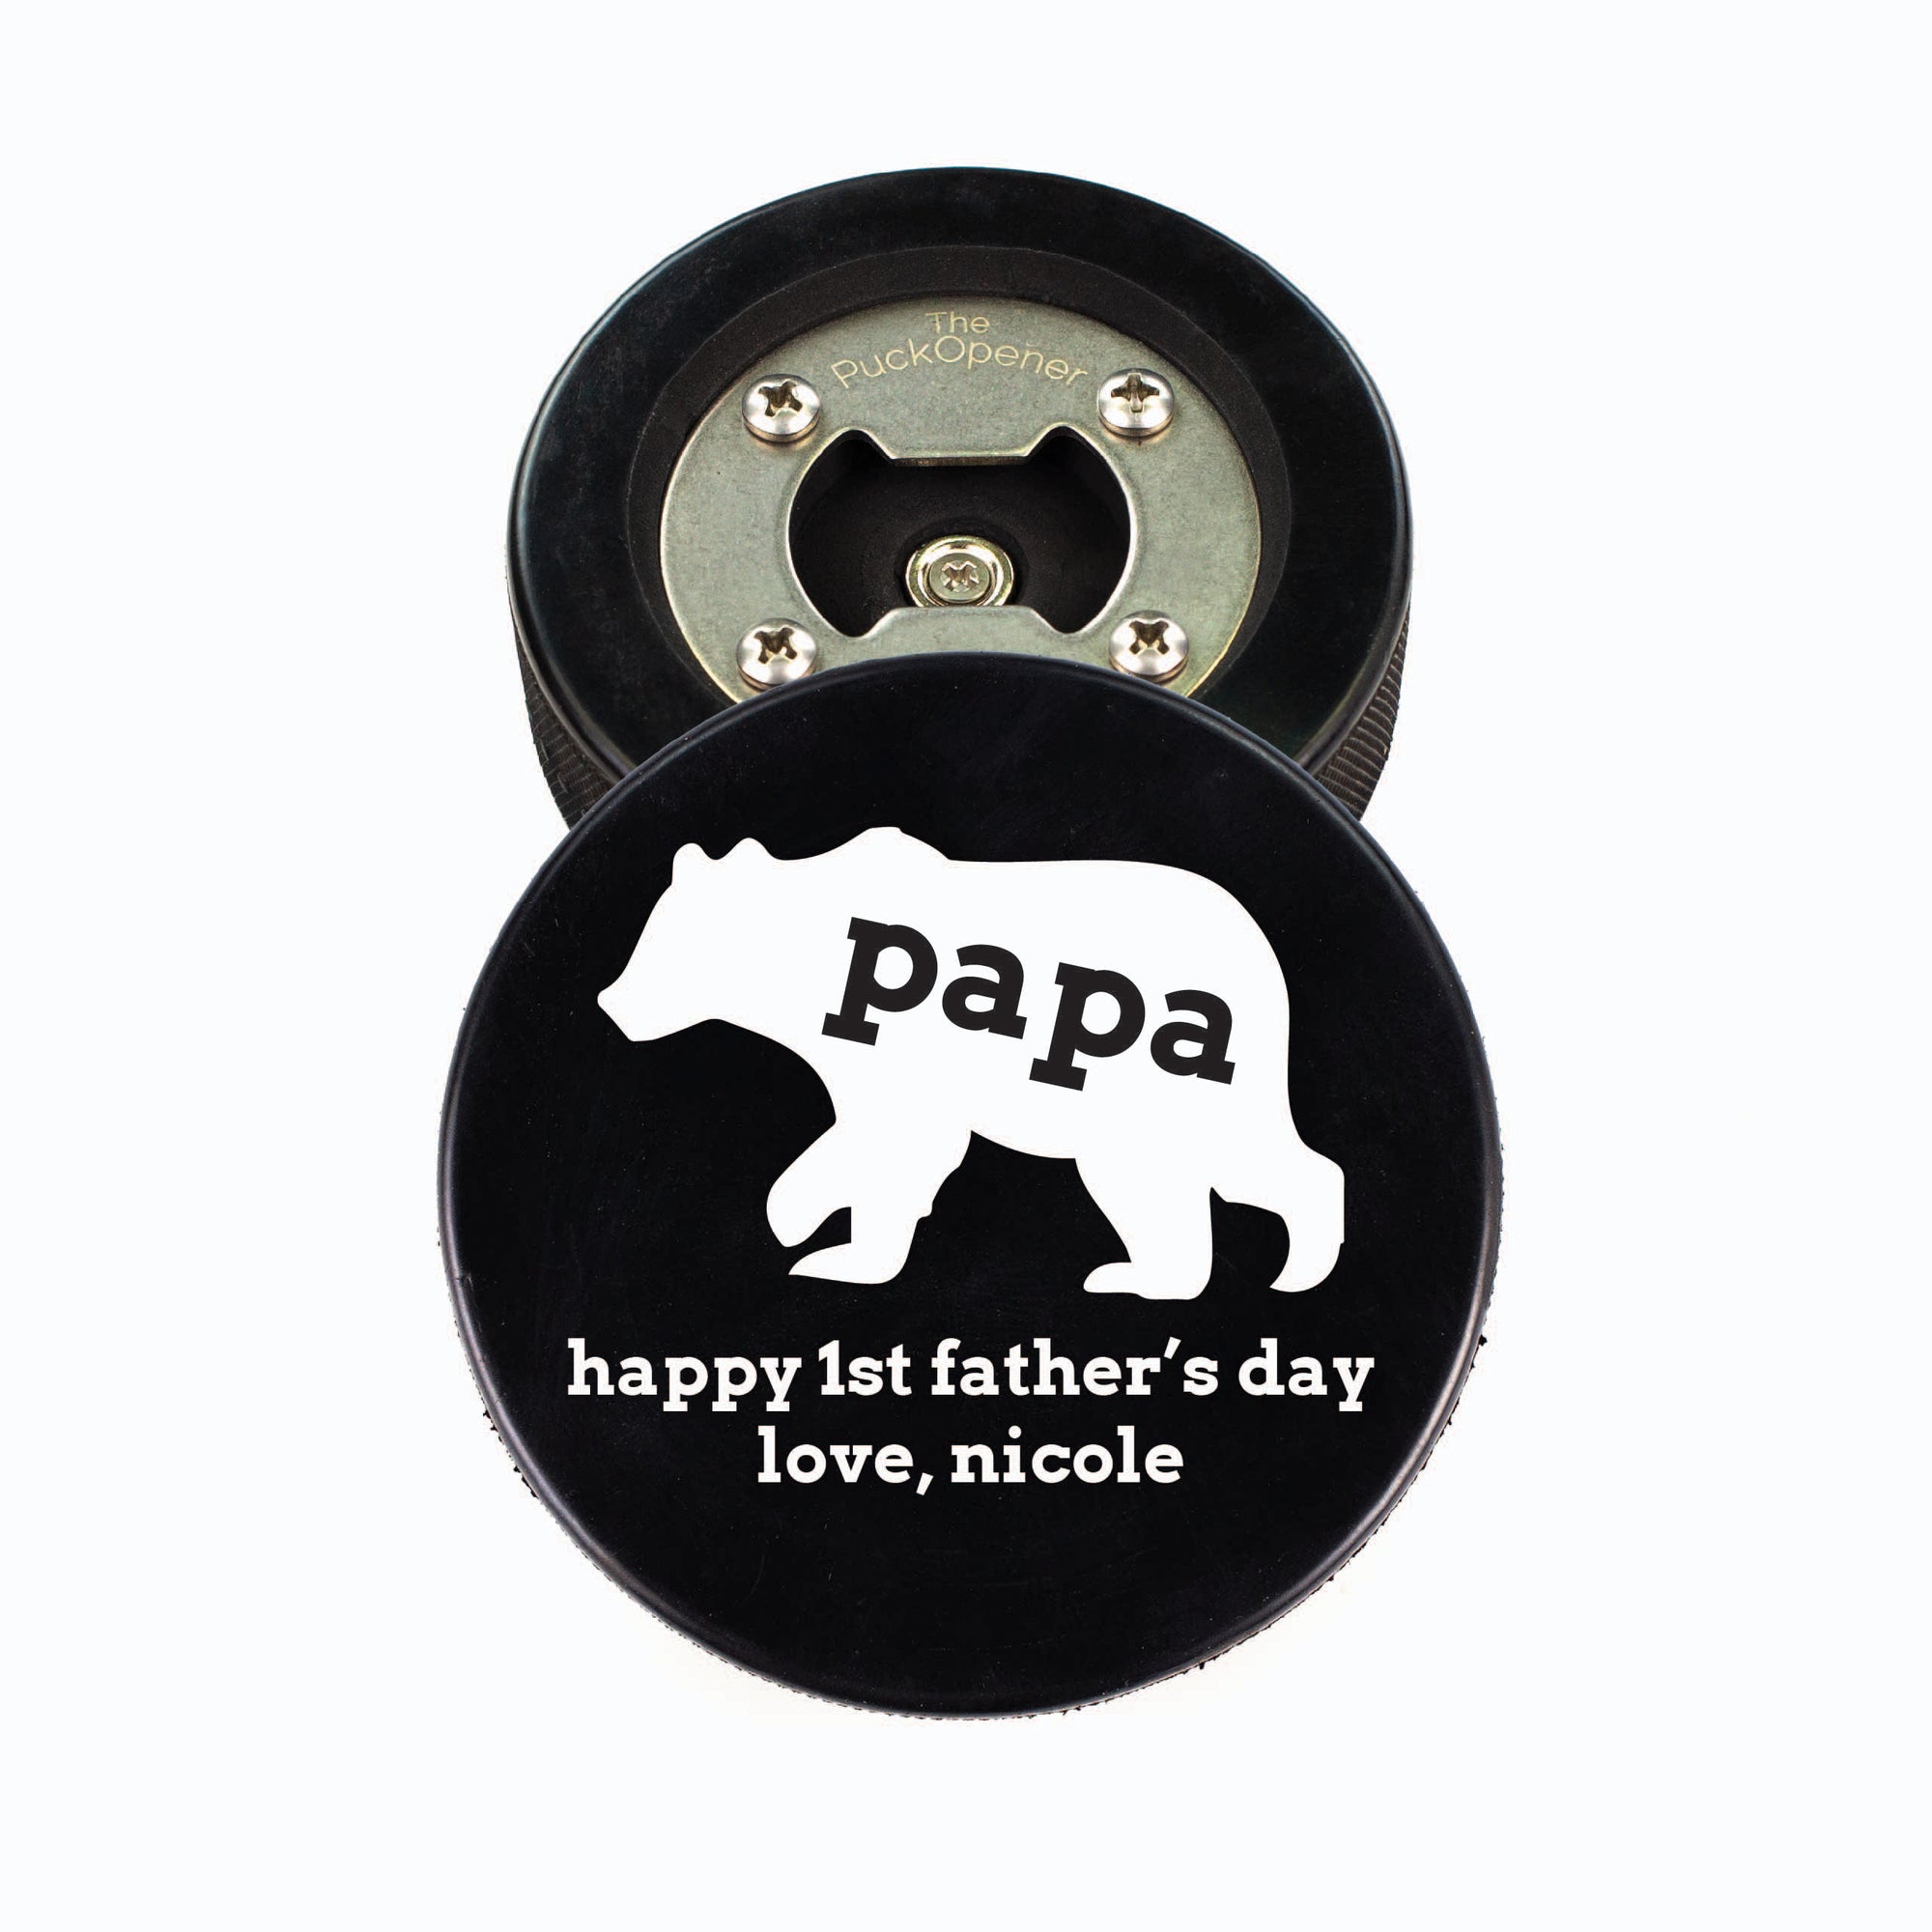 Hockey Puck Bottle Opener, Happy Father's Day